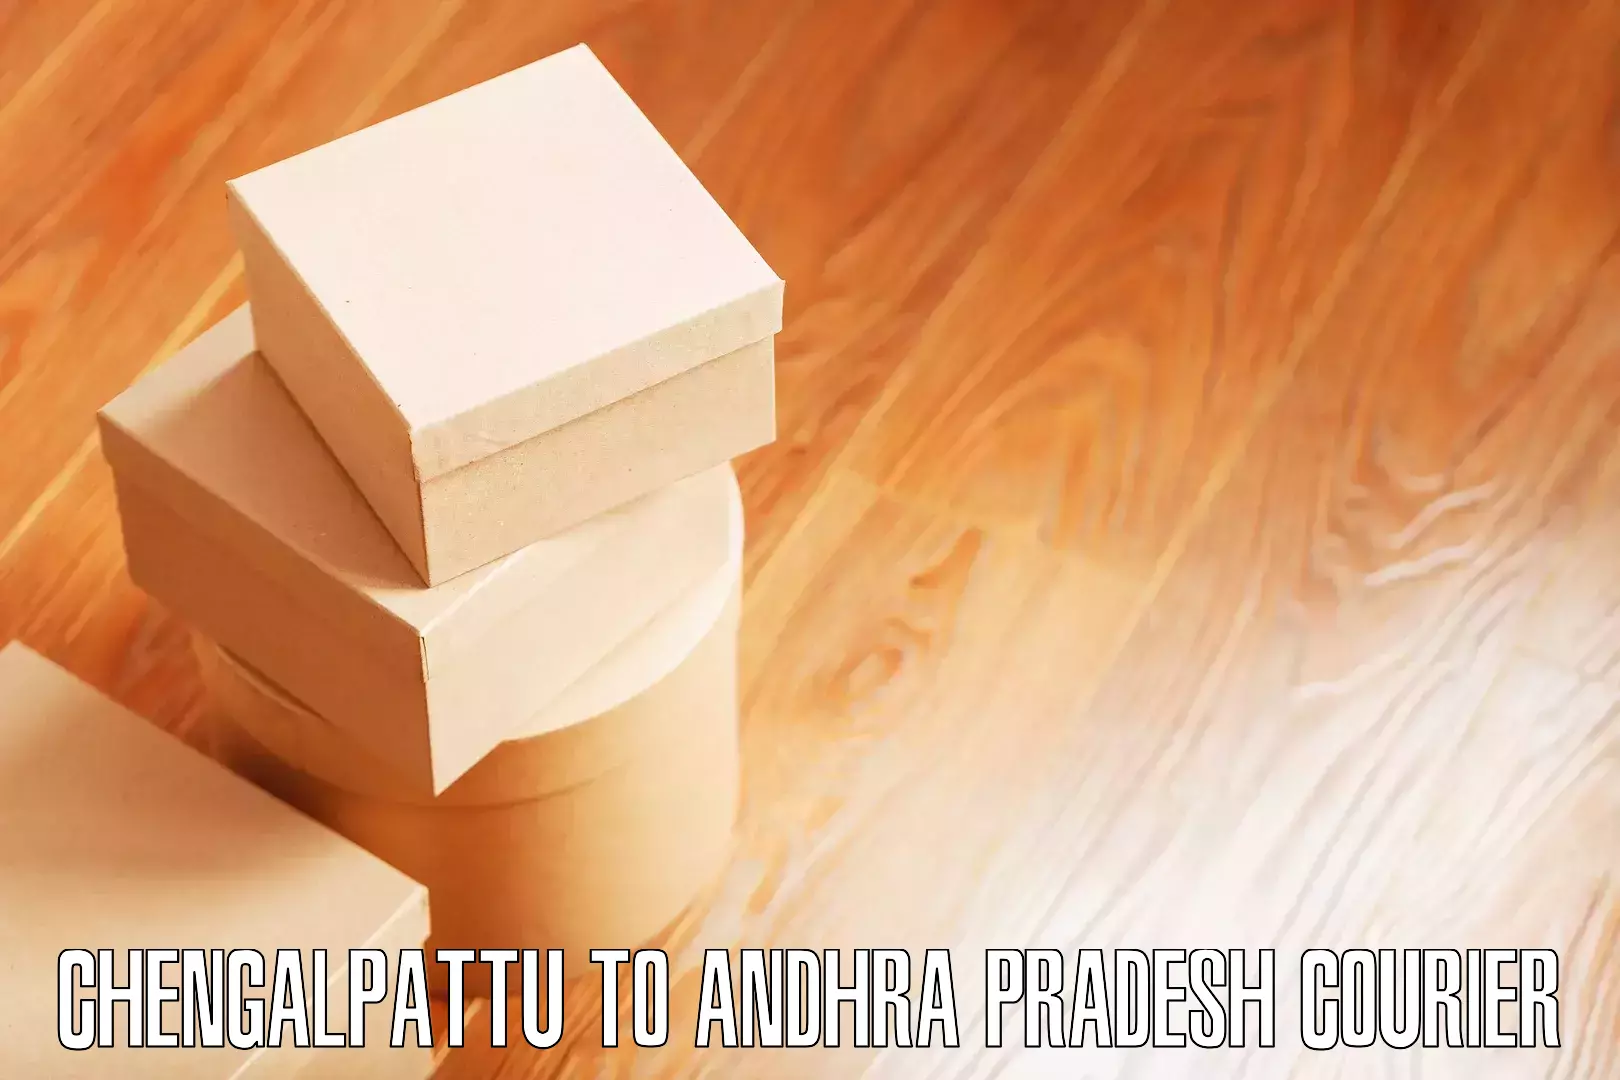 Moving and handling services in Chengalpattu to Andhra Pradesh